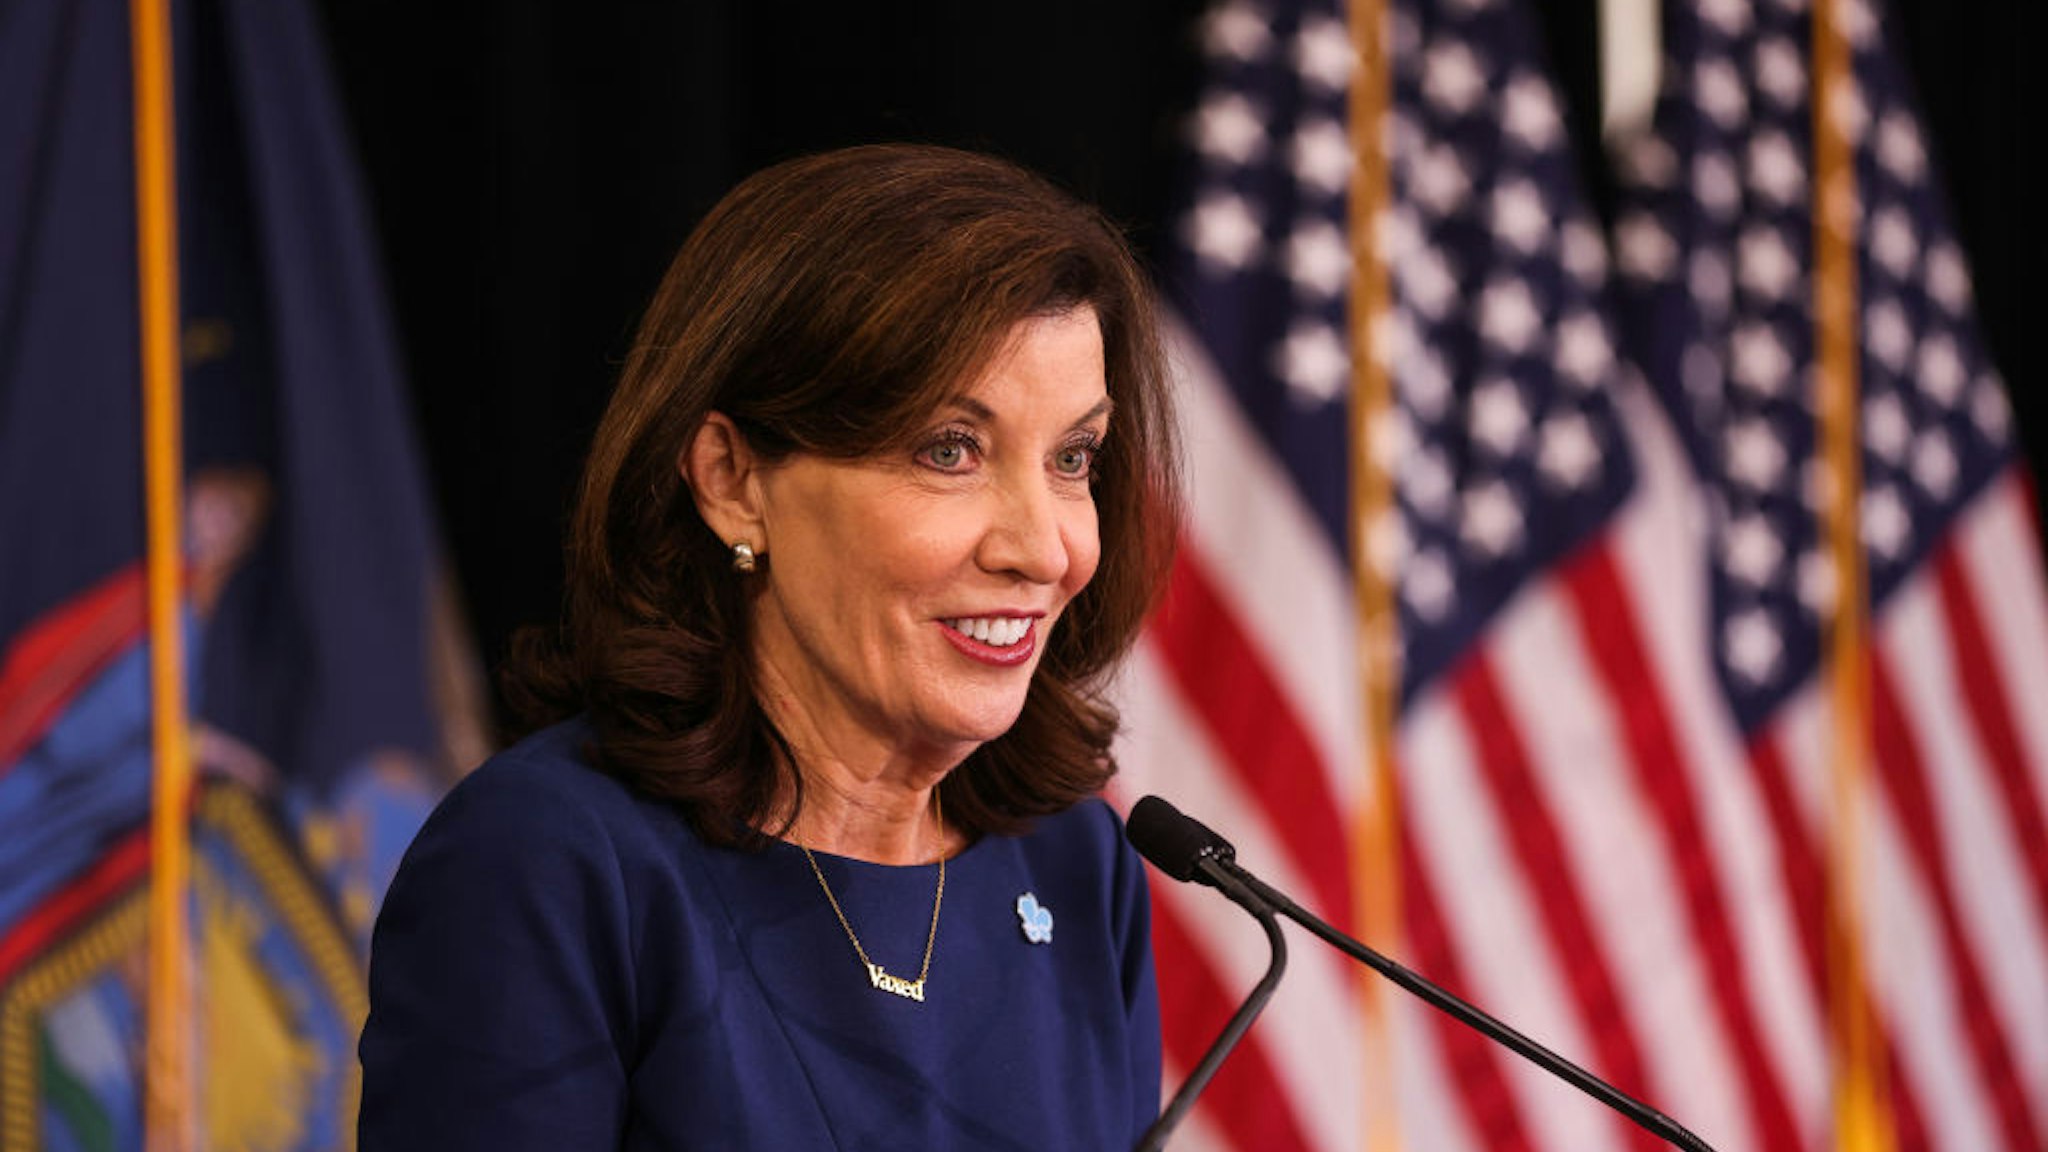 Westbury, N.Y.: New York State Governor Kathy Hochul speaking during a press event at the "Yes We Can" center in Westbury, New York on Oct. 28, 2021. (Photo by Steve Pfost/Newsday RM via Getty Images)